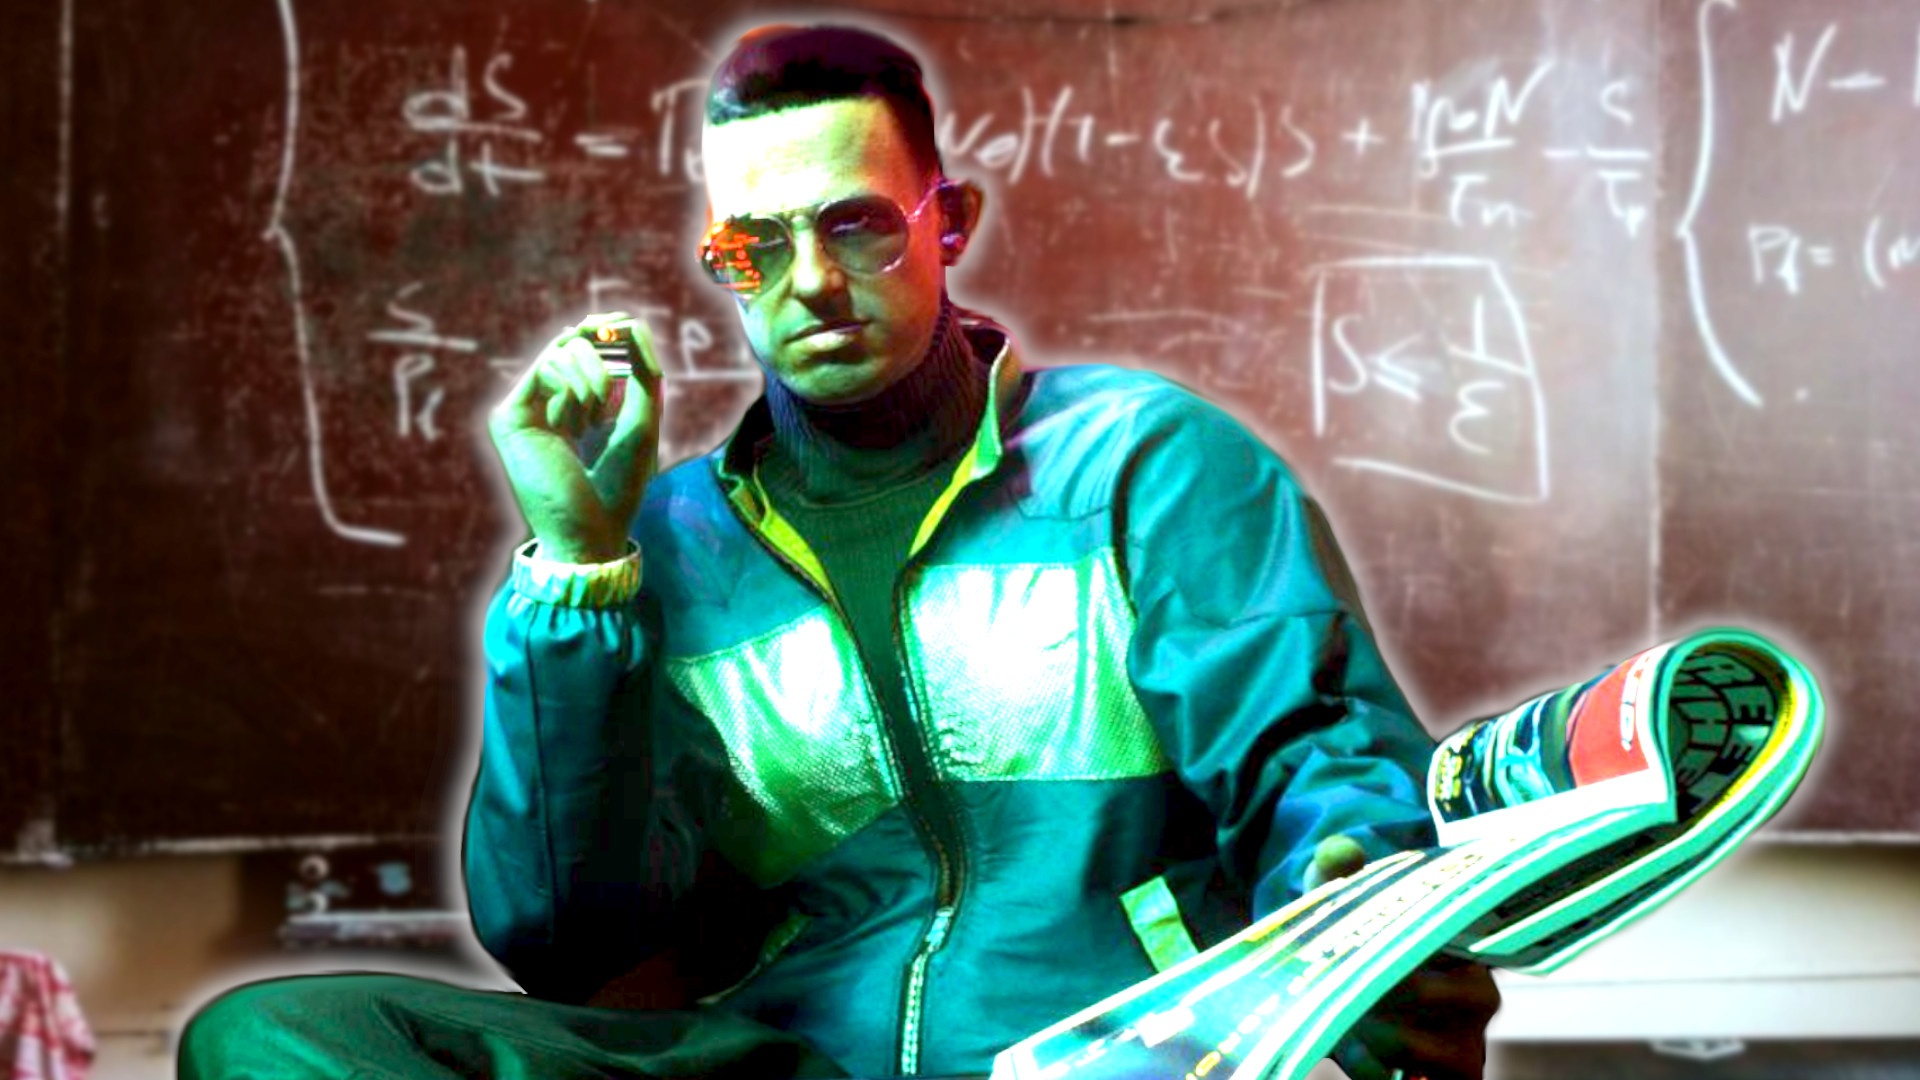 Cyberpunk 2077 Patch 1.2- What is your homework for CD Projekt?